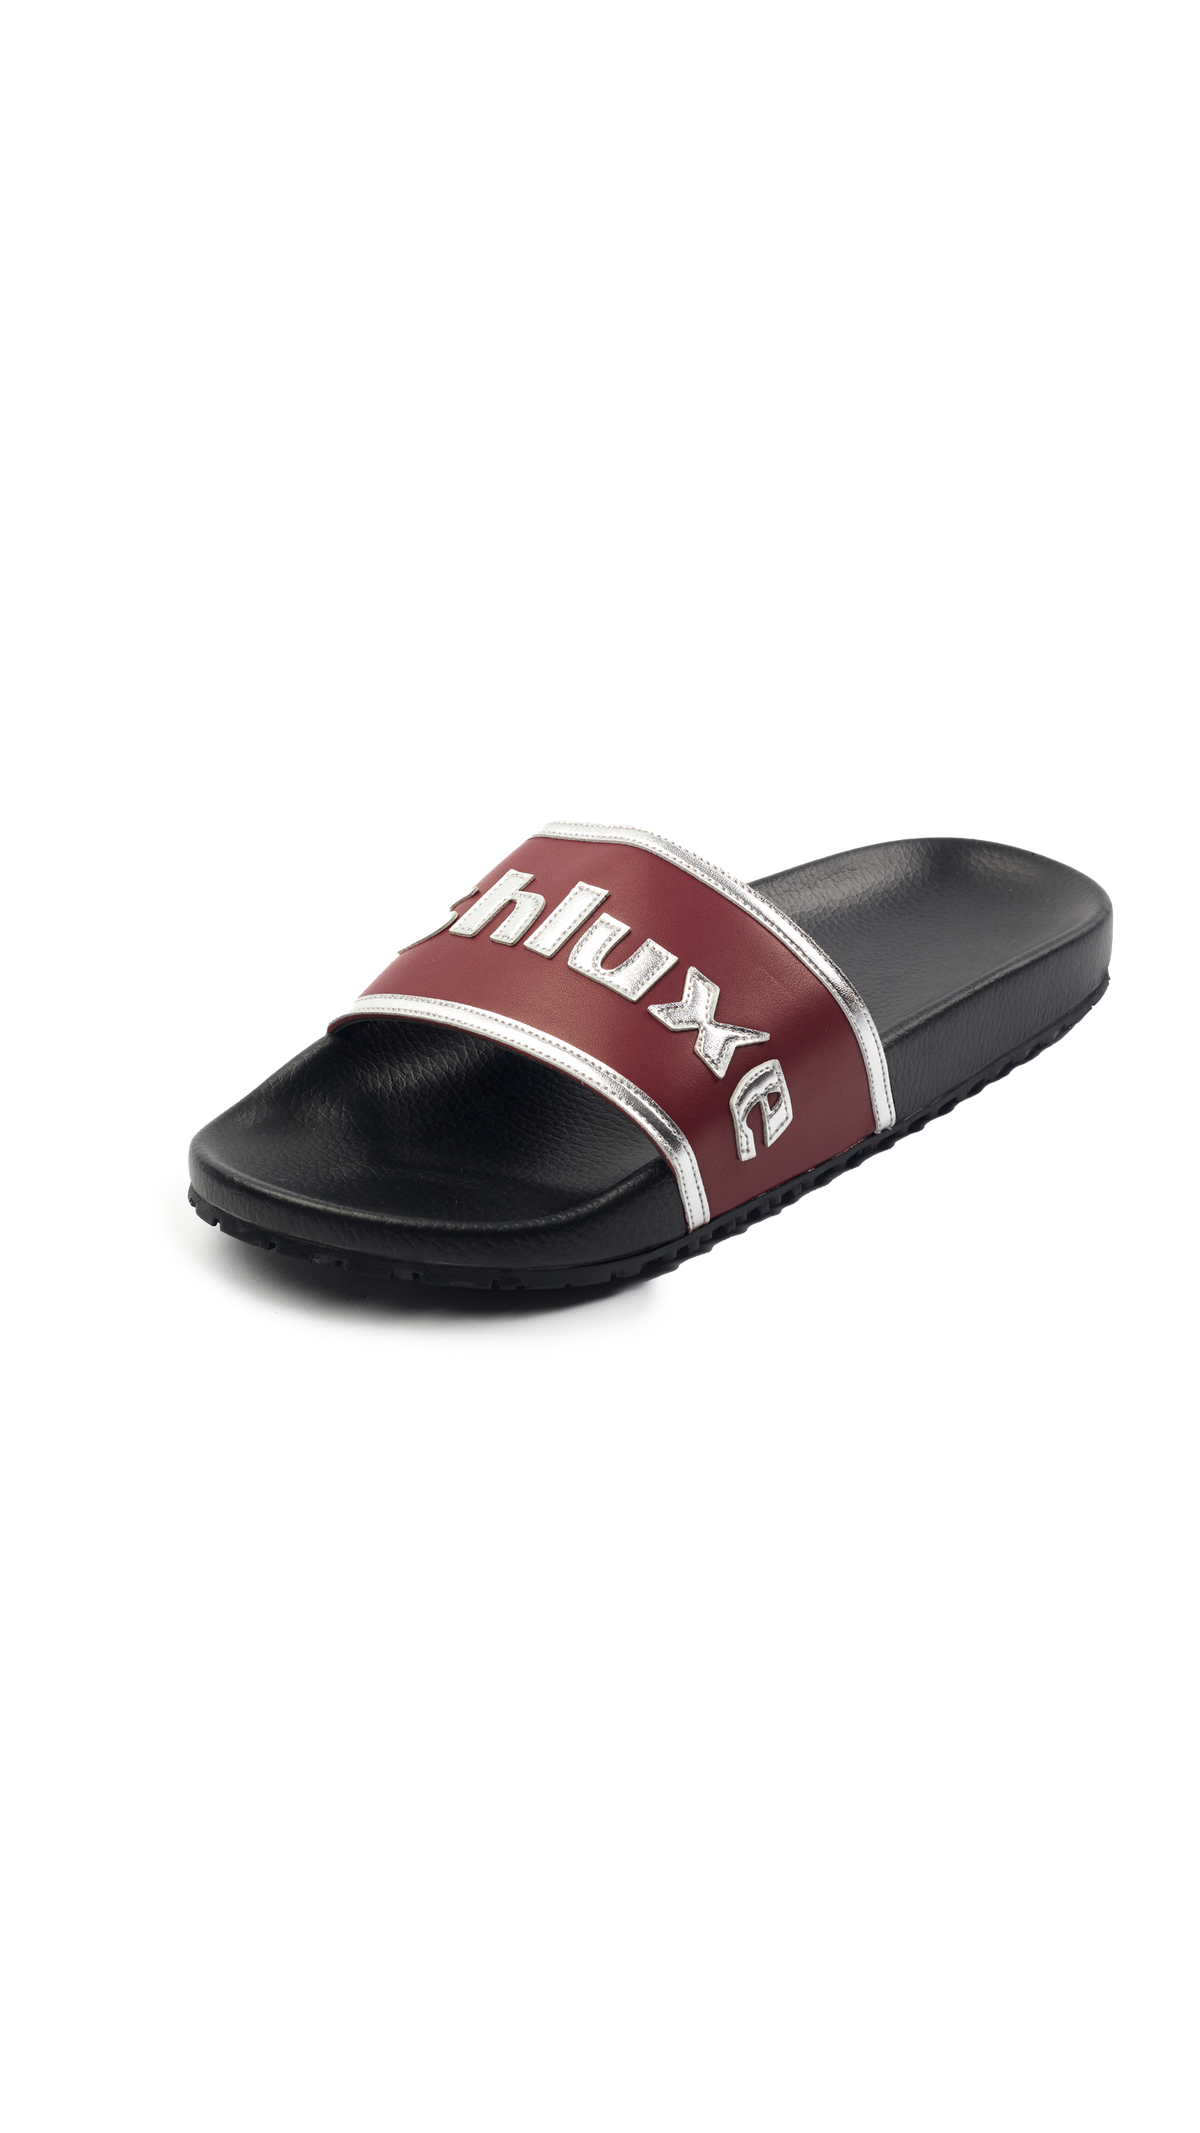 Ashluxe Stitched Leather Slides - Red